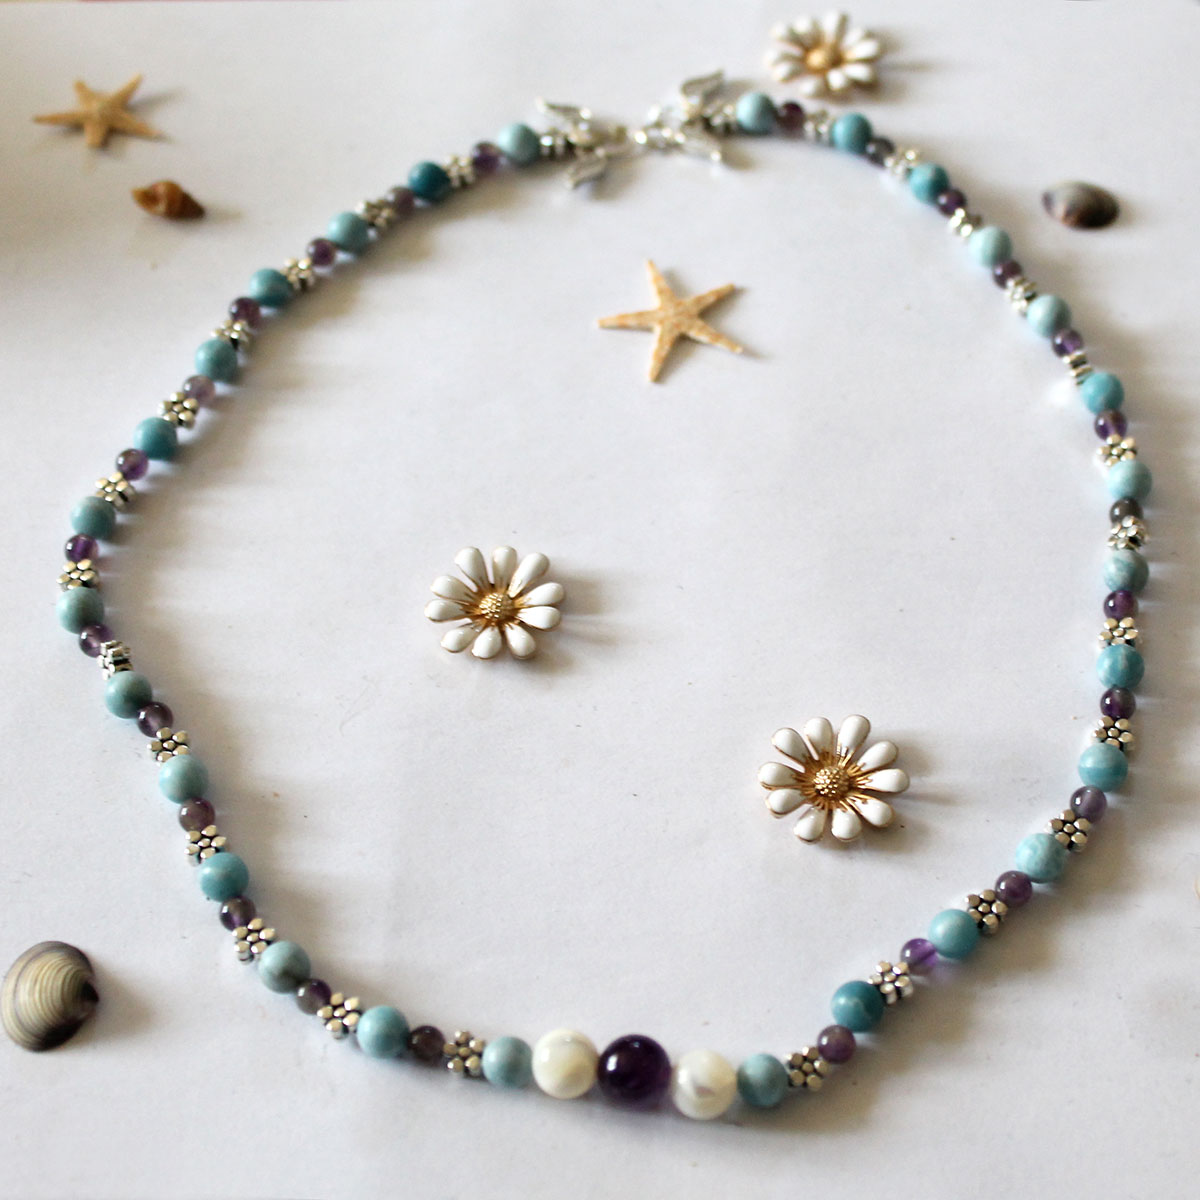 Kindred Spirit Necklace - Daisy Reilly